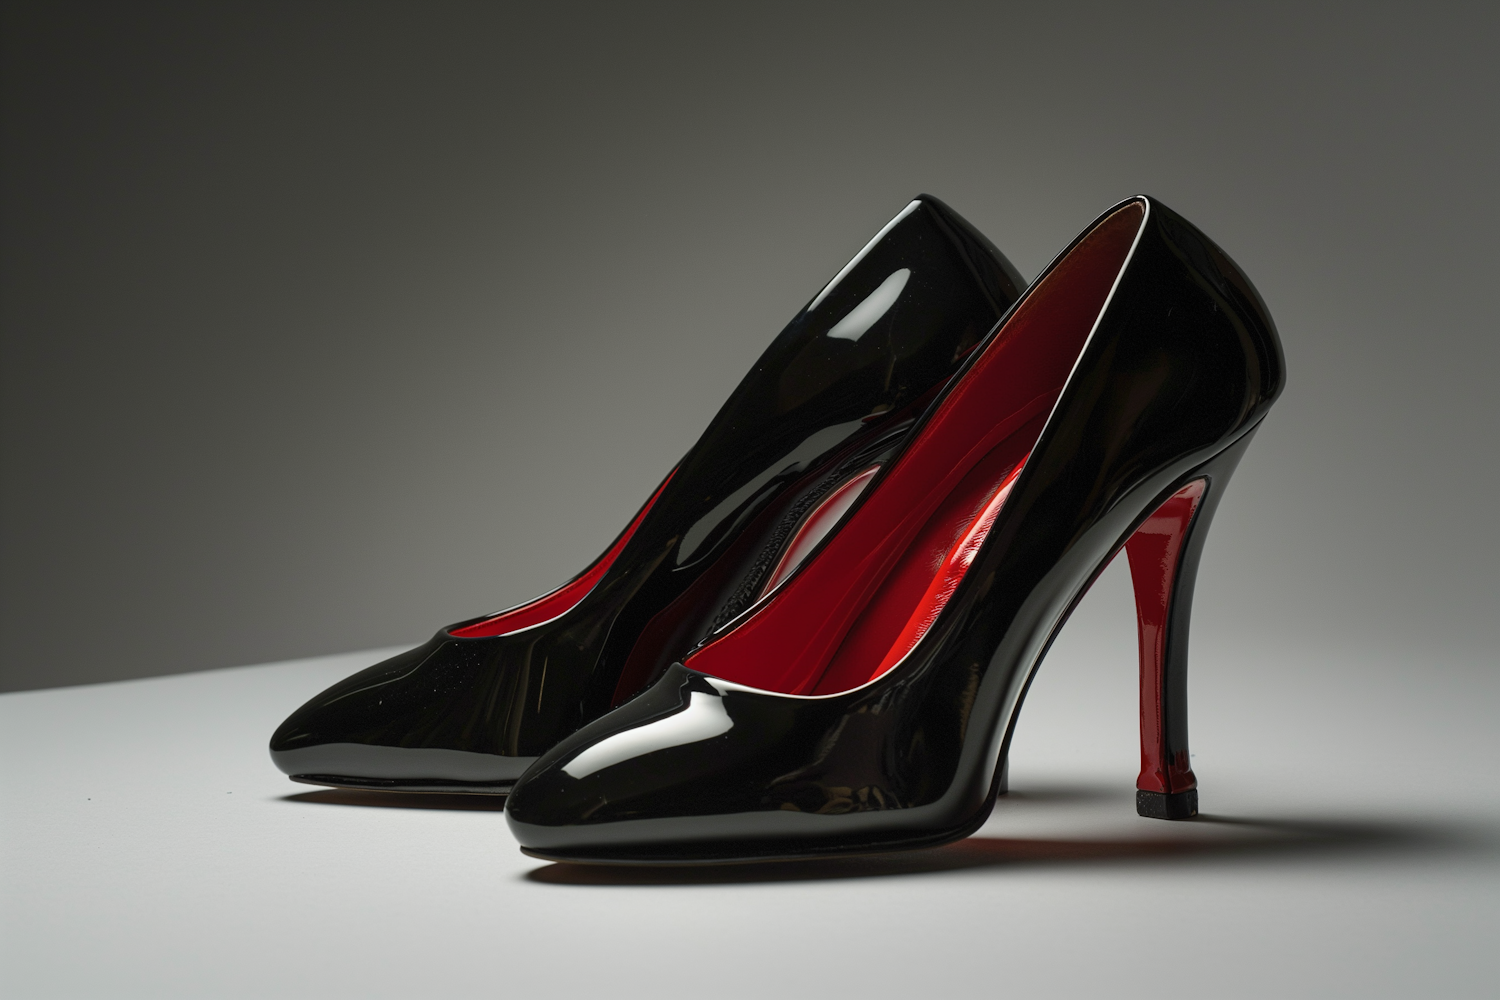 Glossy Black Stiletto Heels with Signature Red Lining and Sole